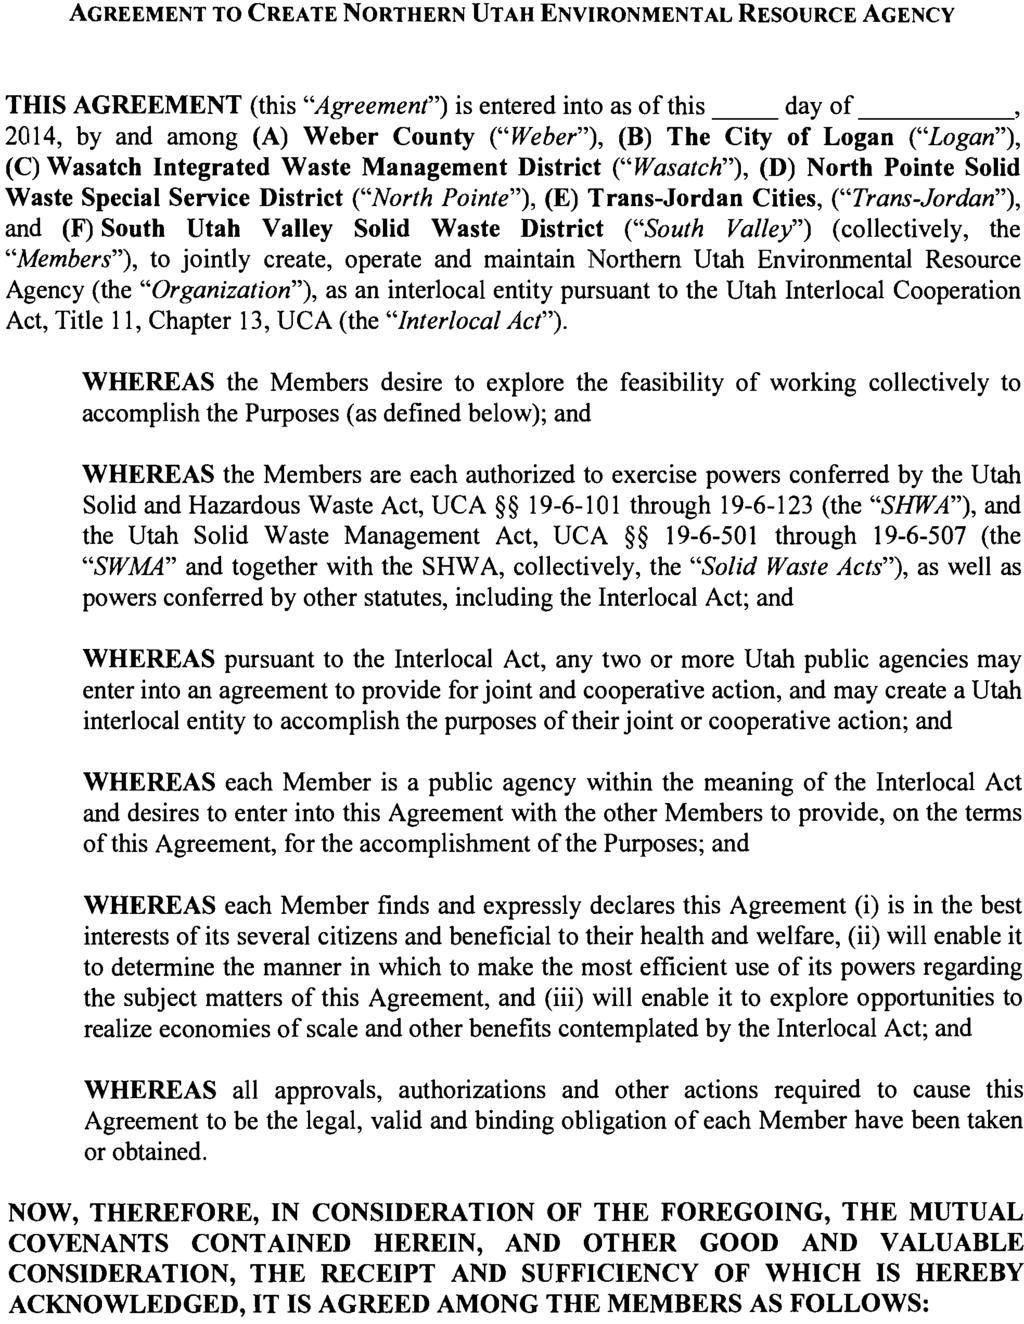 AGREEMENT TO CREATE NORTHERN UTAH ENVIRONMENTAL RESOURCE AGENCY THIS AGREEMENT (this "Agreement") is entered into as of this day of 2014, by and among (A) Weber County ("Weber"), (B) The City of